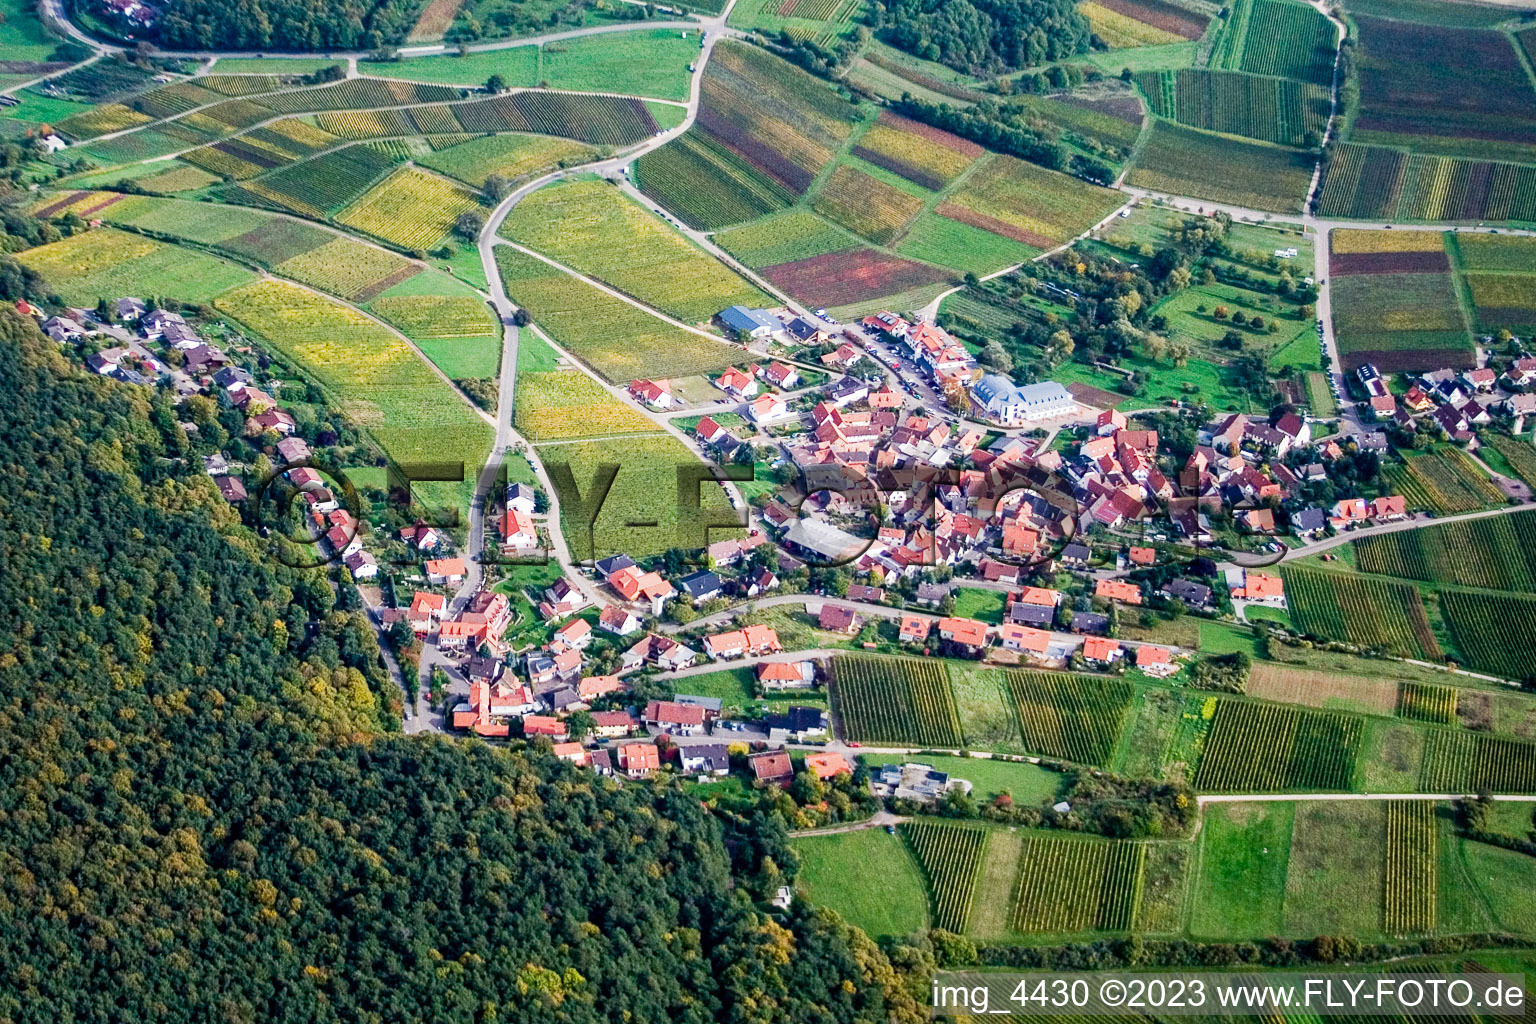 Aerial photograpy of Gleishohrbach in the district Gleiszellen in Gleiszellen-Gleishorbach in the state Rhineland-Palatinate, Germany